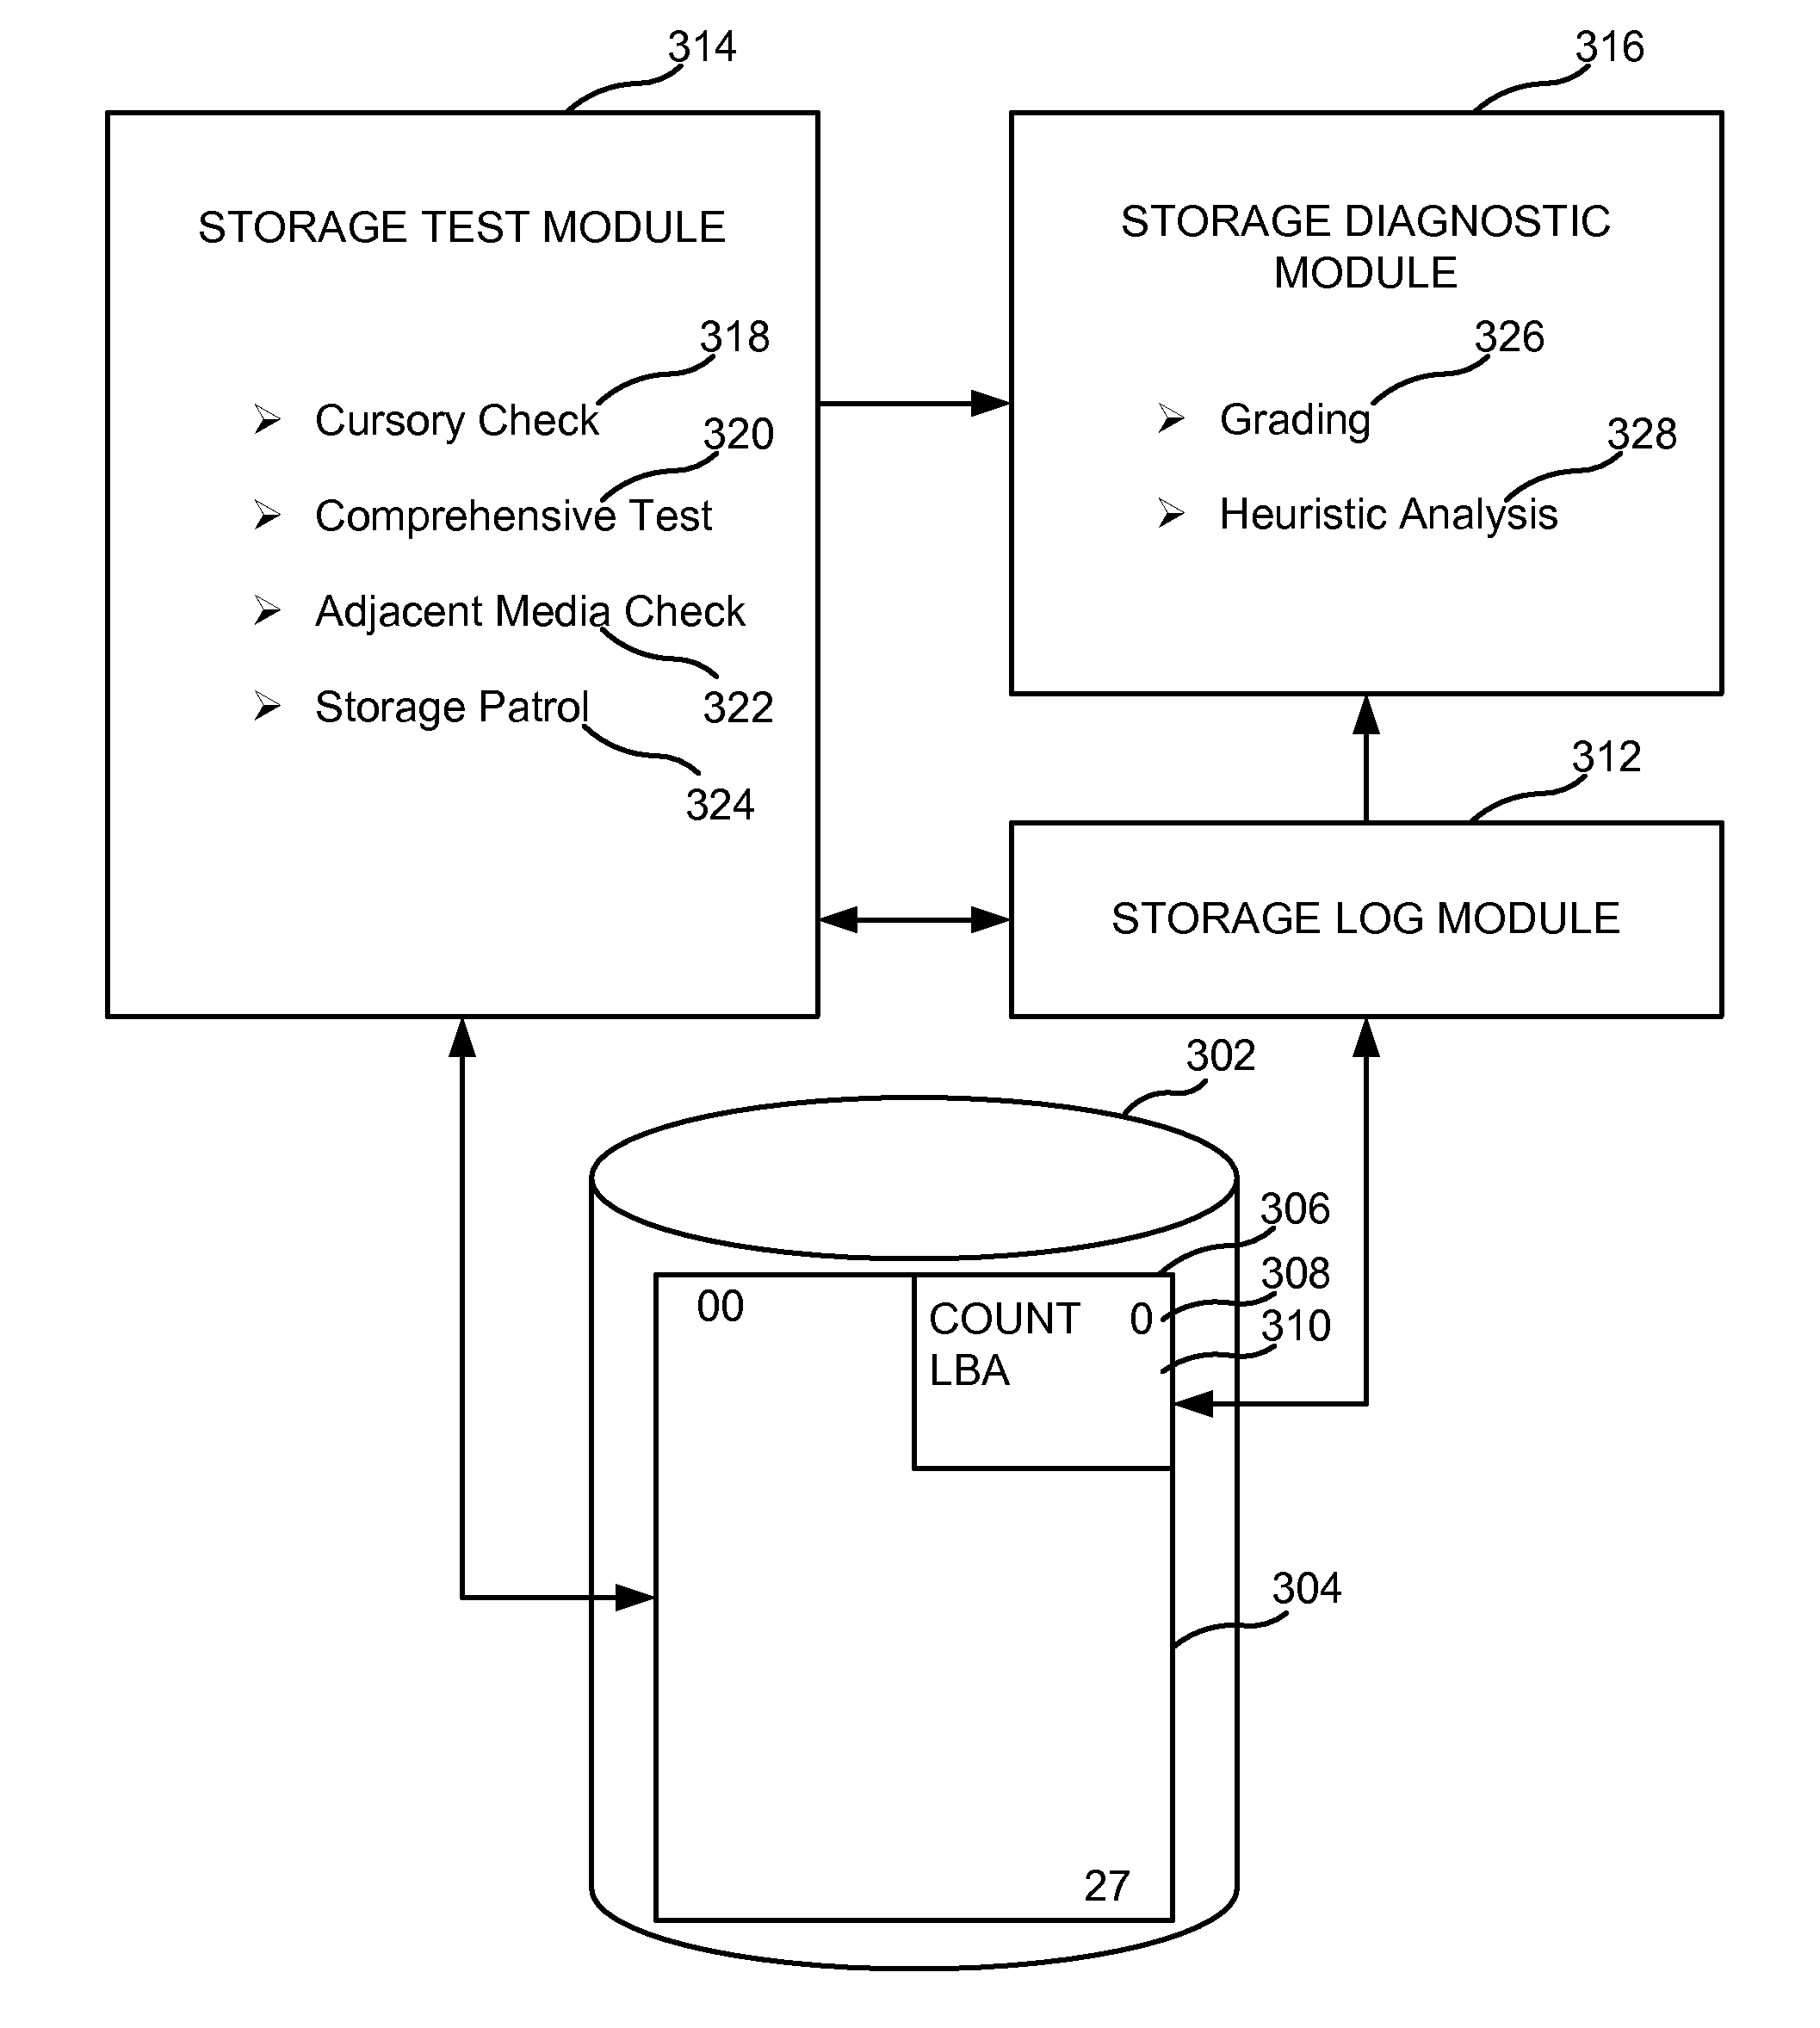 Apparatus, system, and method for rapid grading of computer storage operating condition